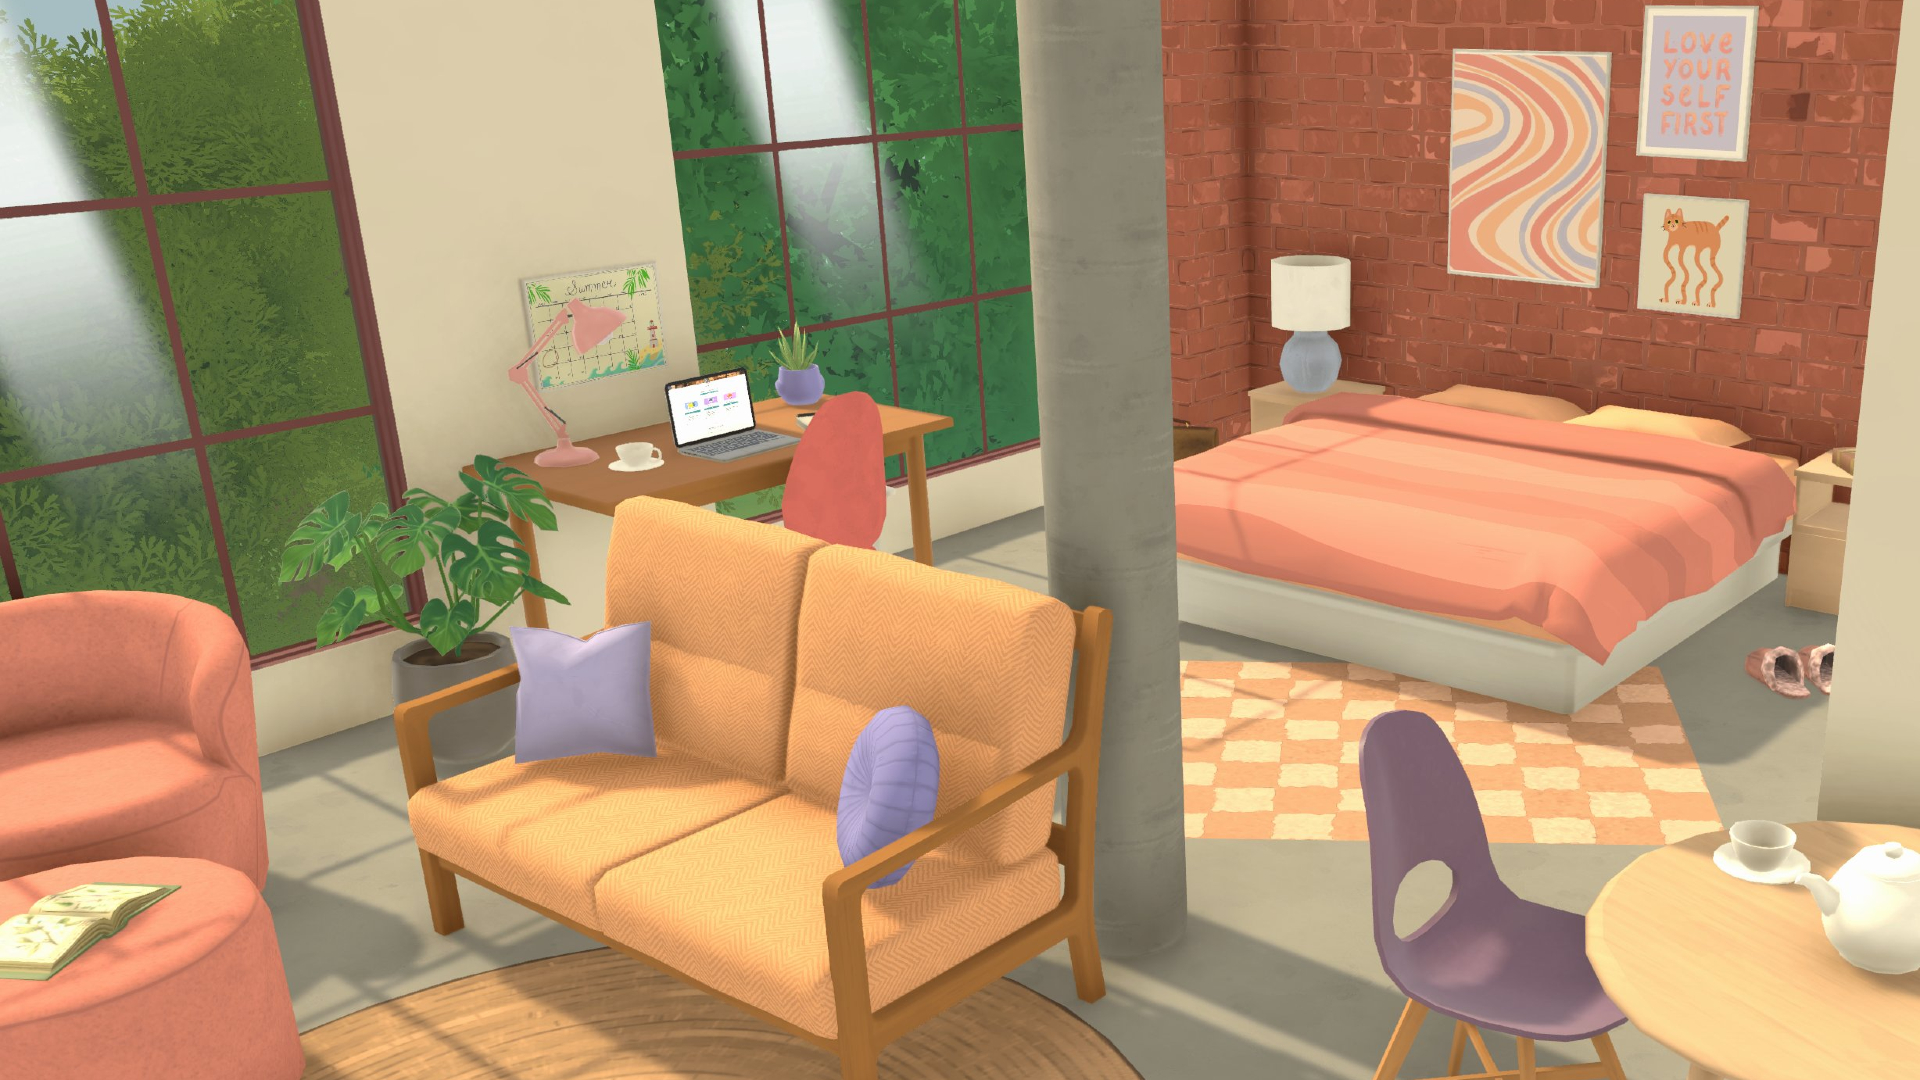 A well-lit bedroom with a soft pink double bed and a yellow couch with blue pillows